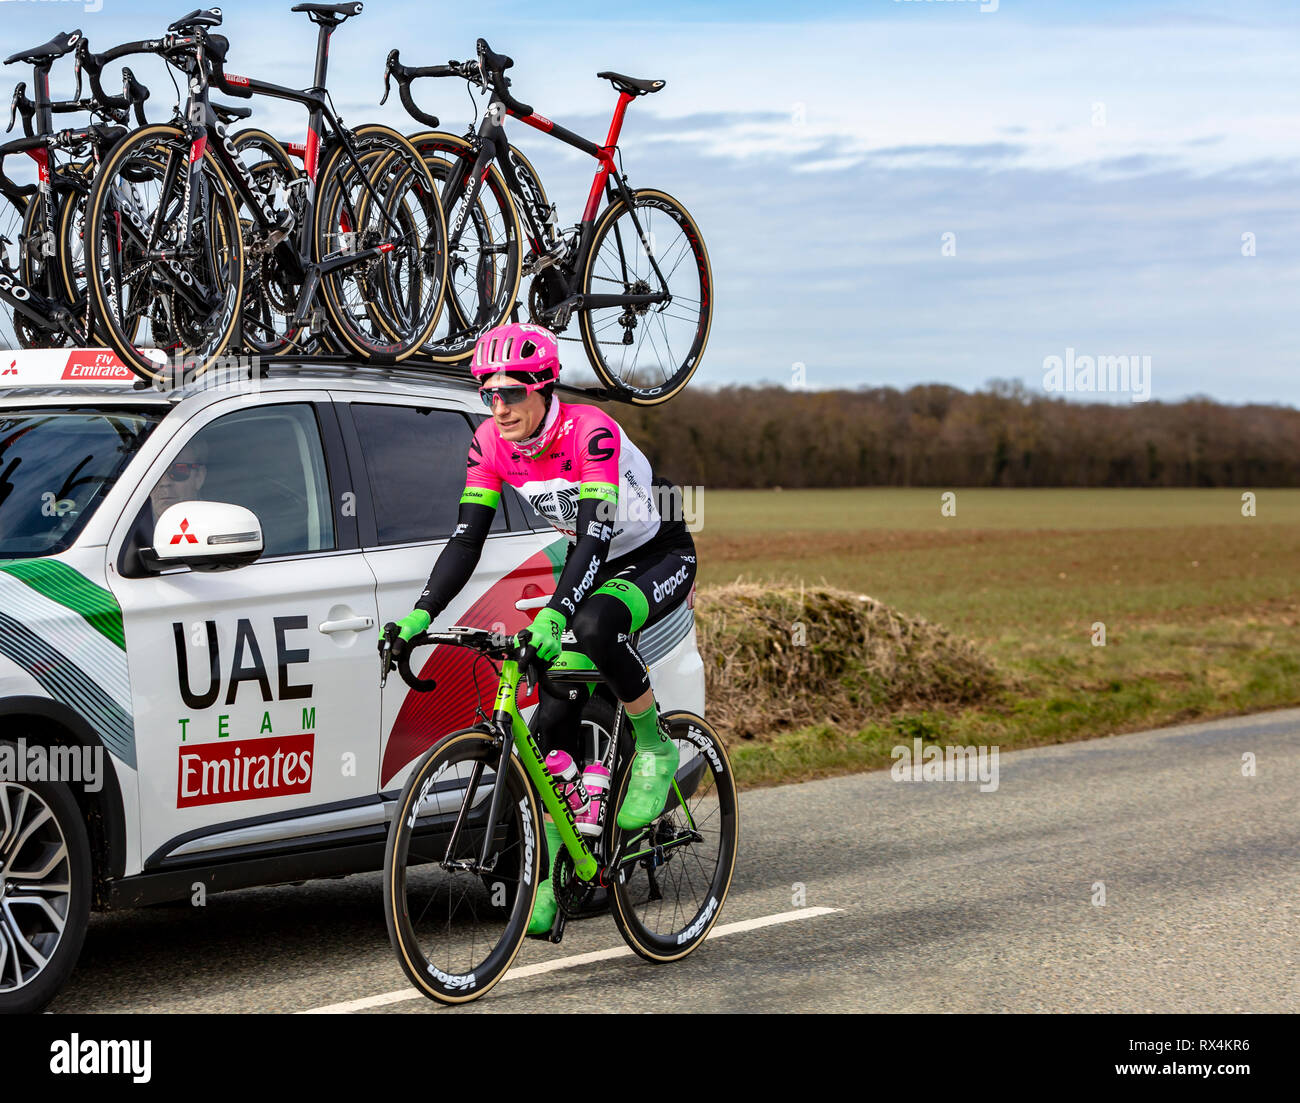 Fains-la-Folie, France - March 5, 2018: The French cyclist Pierre Rolland of EF Education First-Drapac Team riding on a country road during the stage  Stock Photo